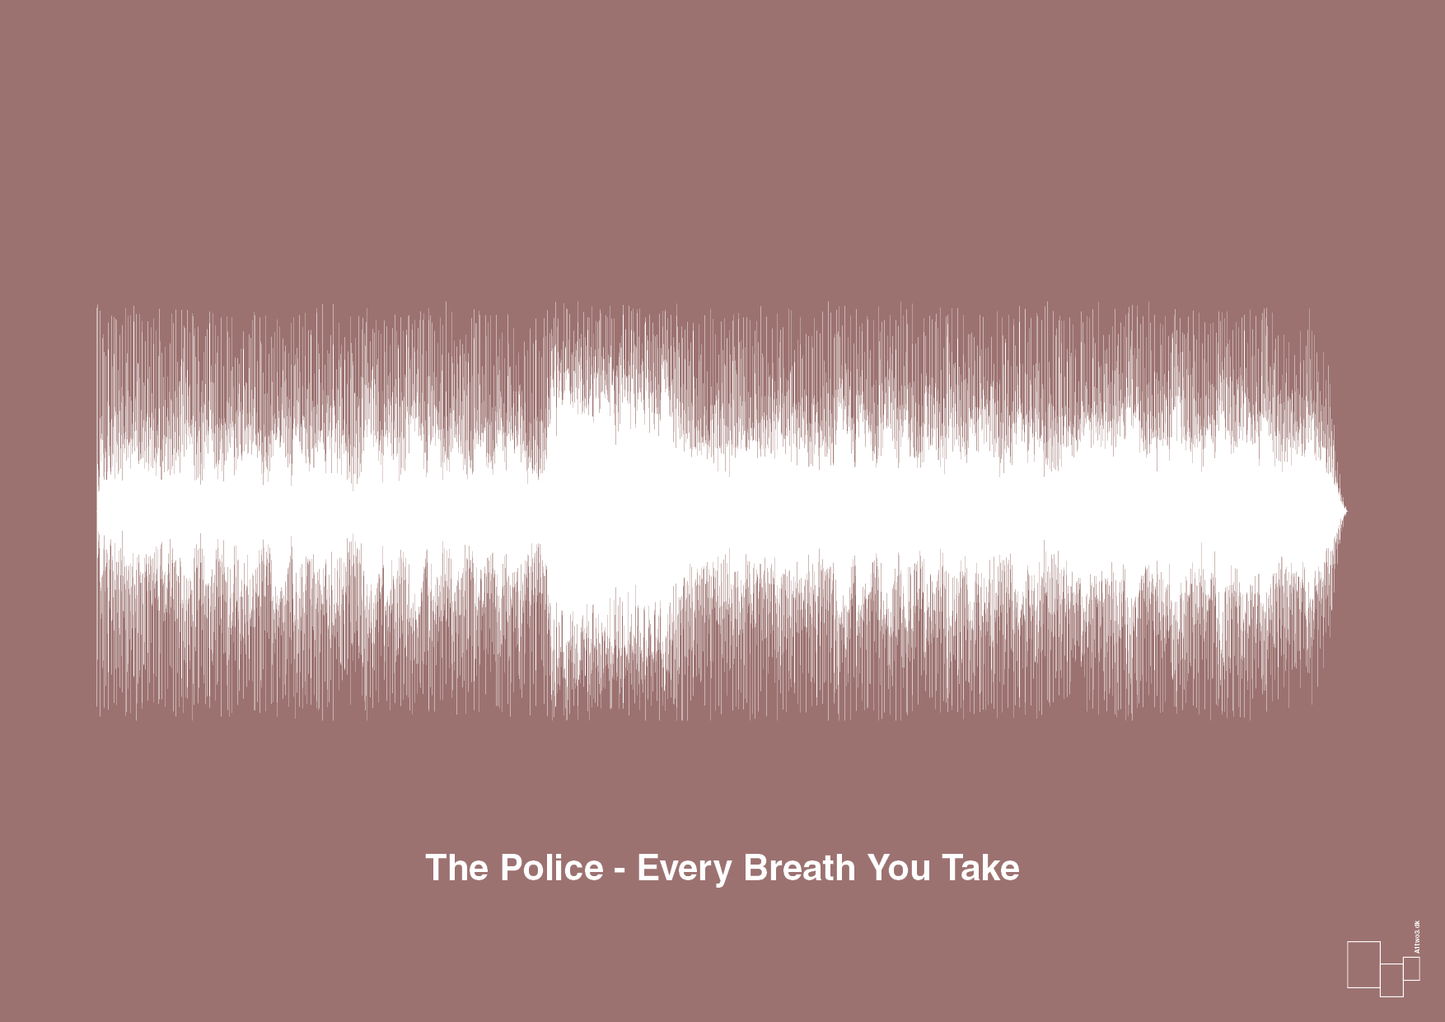 the police - every breath you take - Plakat med Musik i Plum